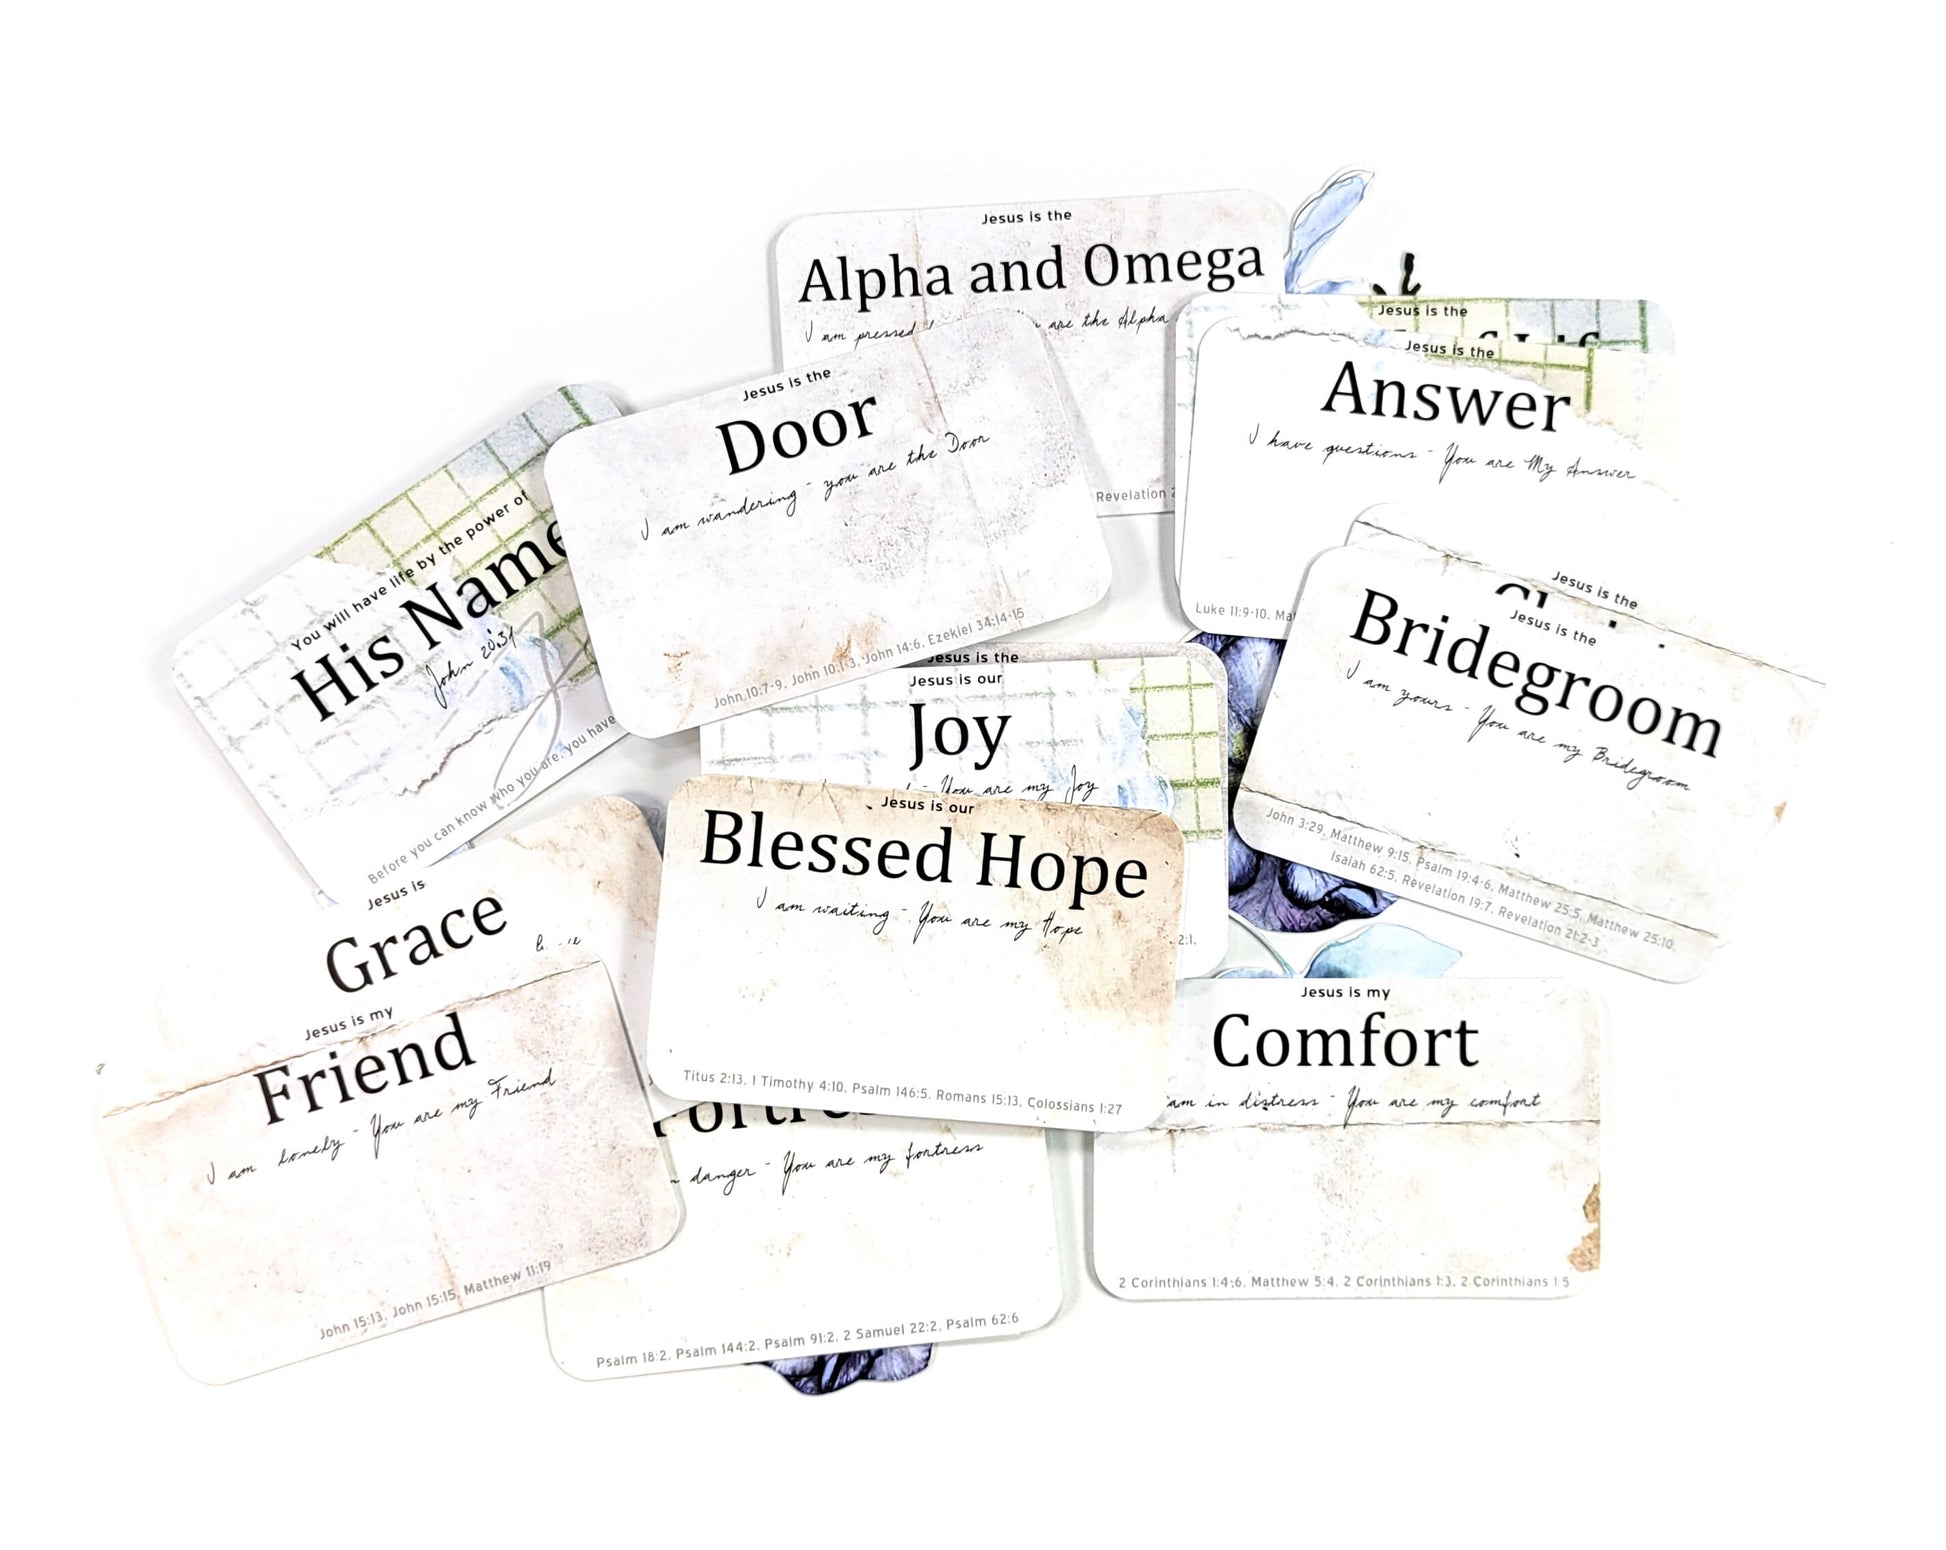 His Name - 33 Names of Jesus card set (with Bible verse references)